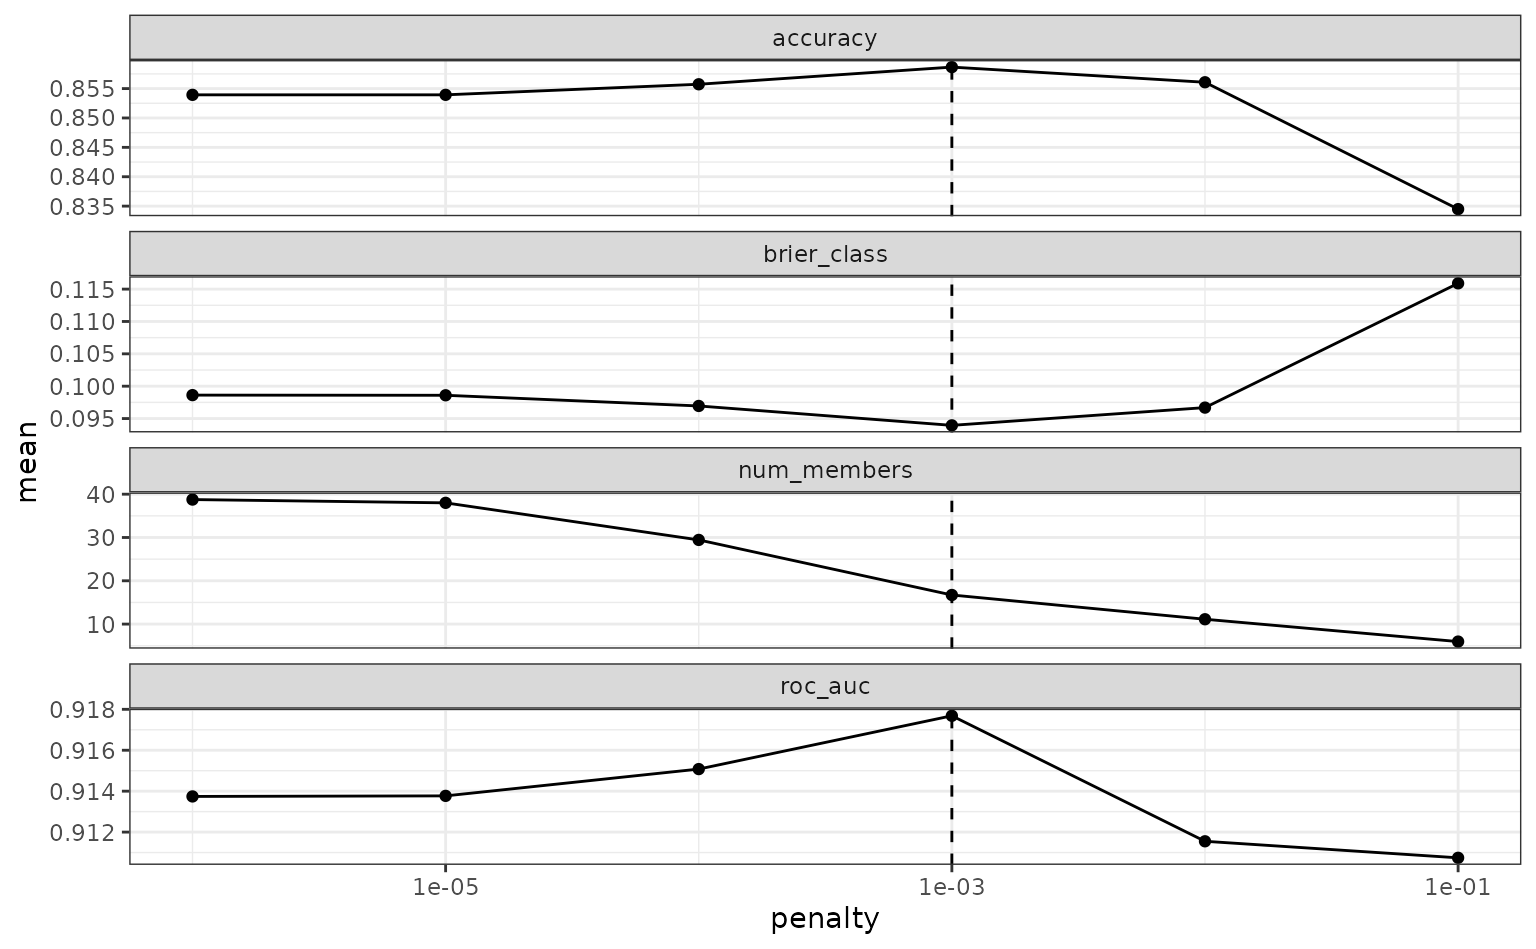 A ggplot line plot. The x axis shows the degree of penalization, ranging from 1e-06 to 1e-01, and the y axis displays the mean of three different metrics. The plots are faceted by metric type, with three facets: accuracy, number of members, and ROC AUC. The plots generally show that, as penalization increases, the error increases, though fewer members are included in the model. A dashed line at a penalty of 1e-05 indicates that the stack has chosen a smaller degree of penalization.